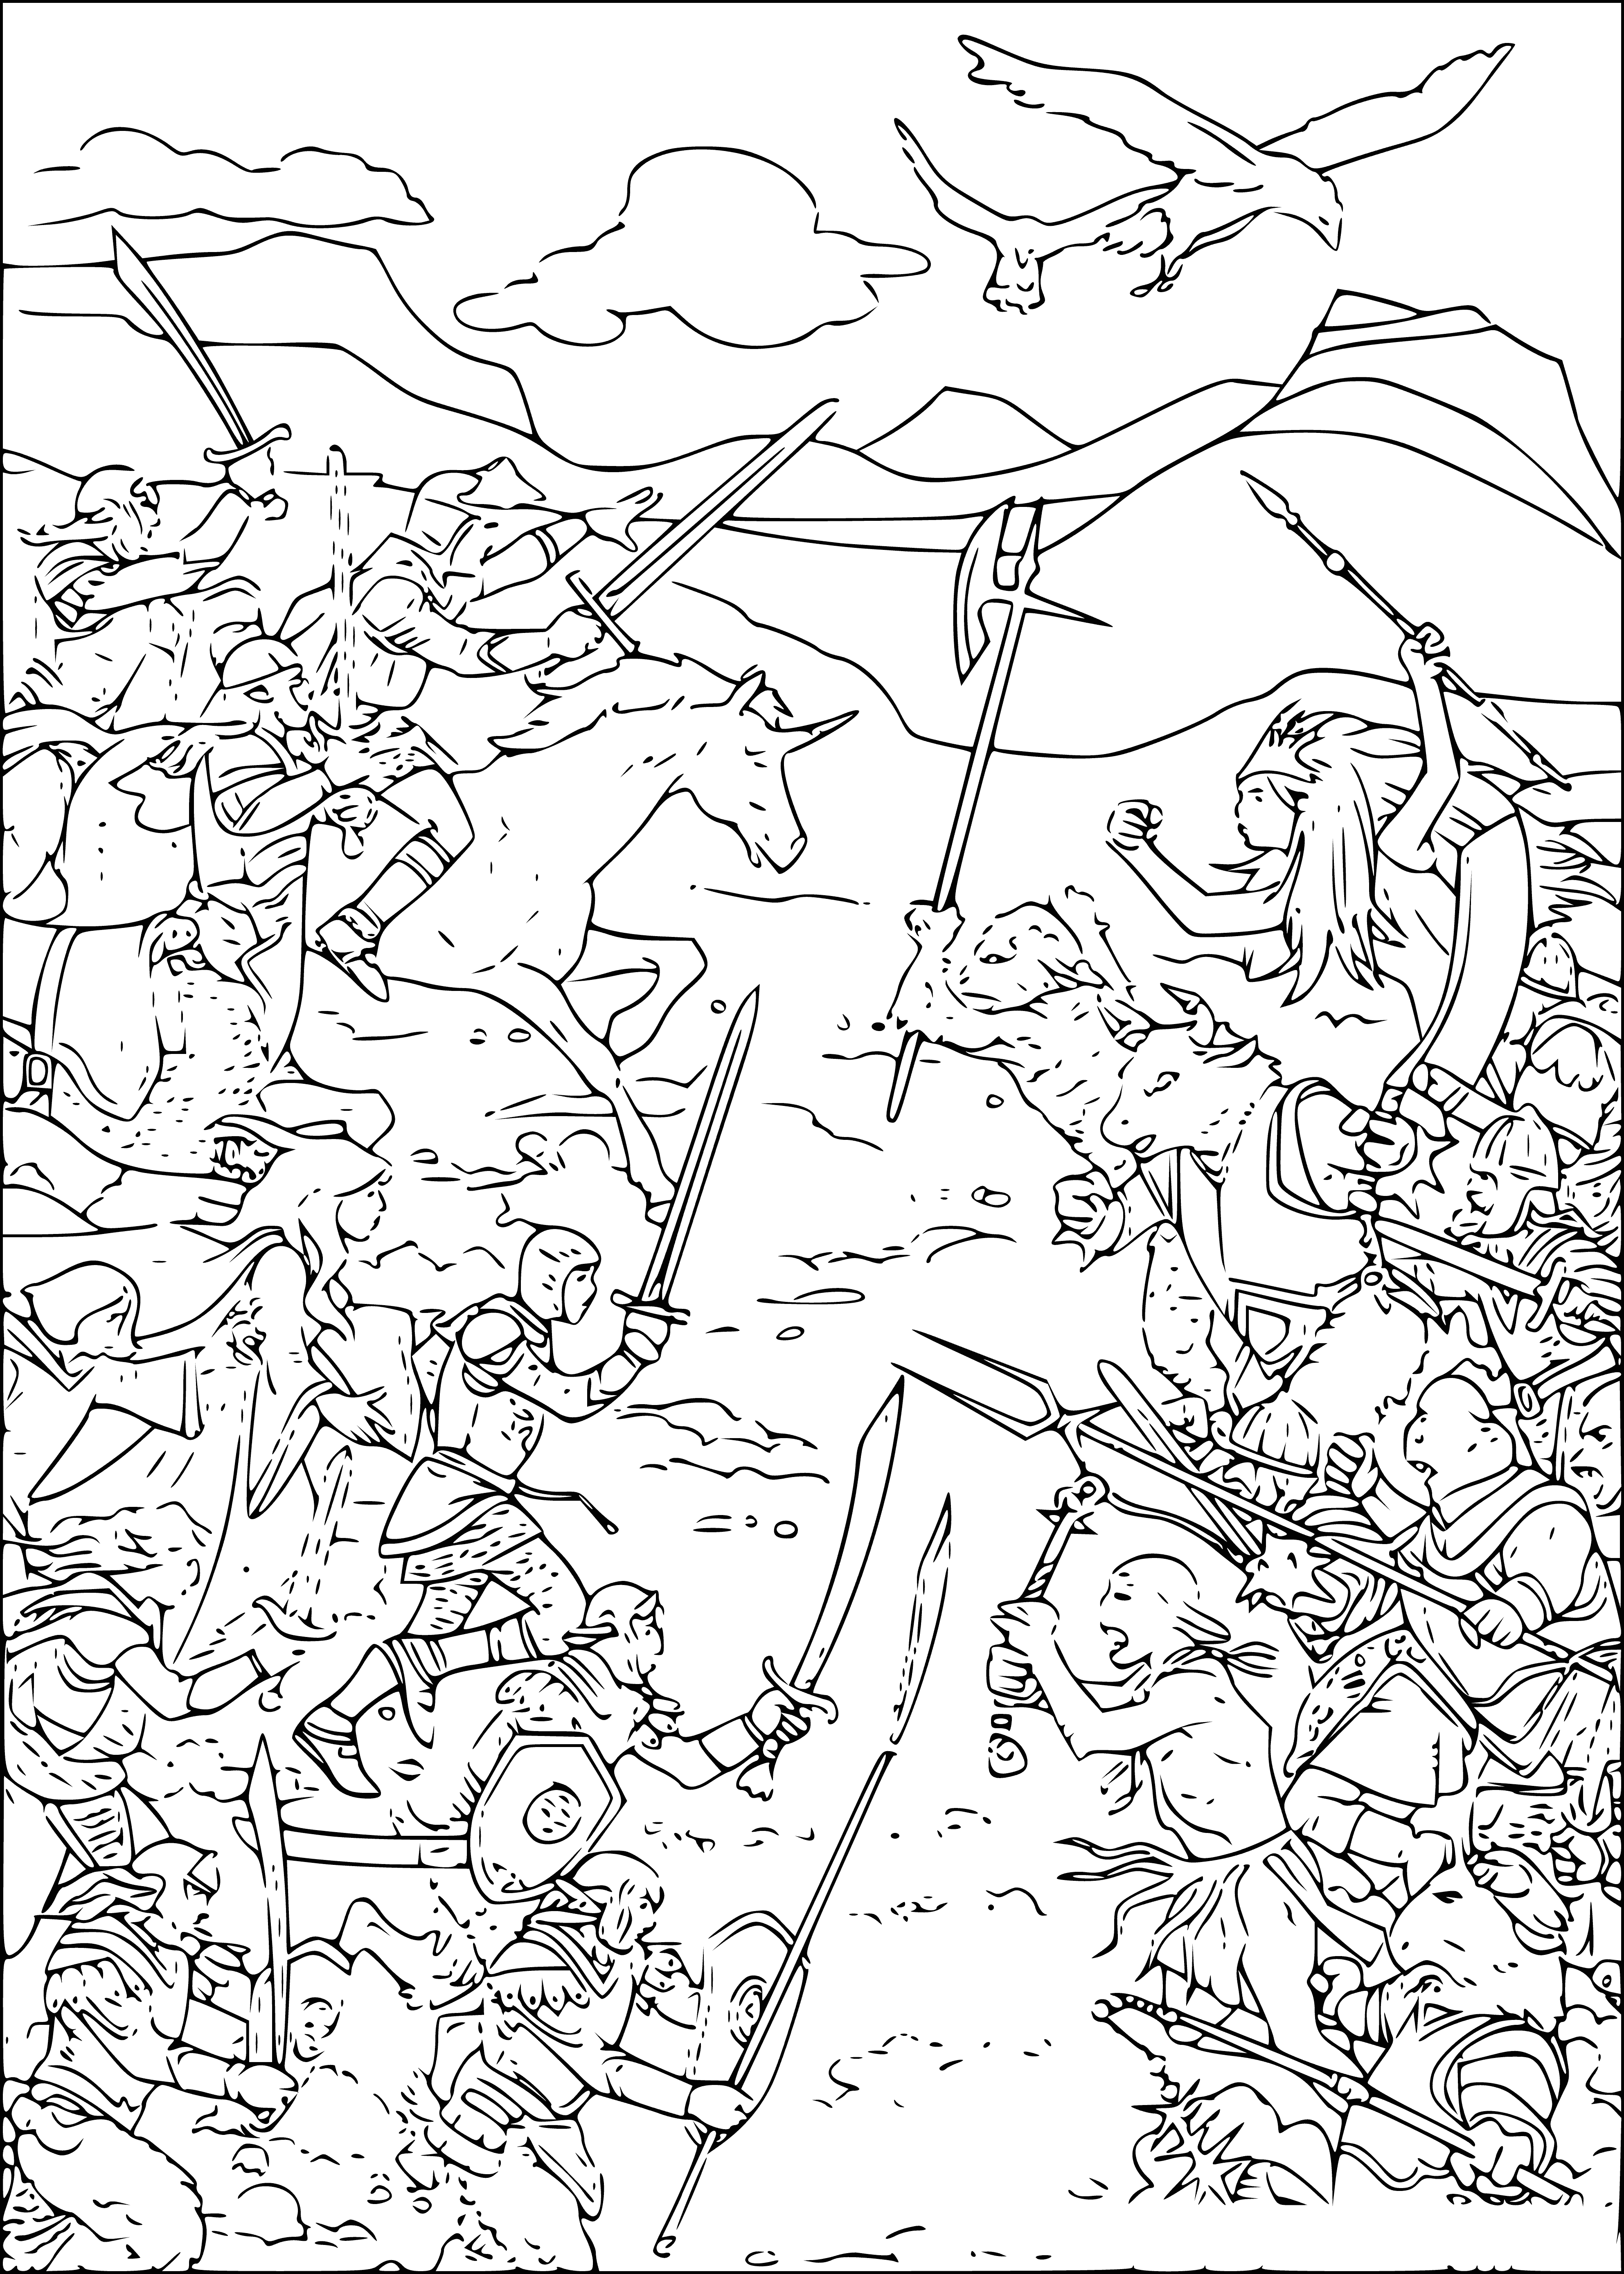 coloring page: Kids coloring page of lion, boy and girl with swords, plus battle scene in background.